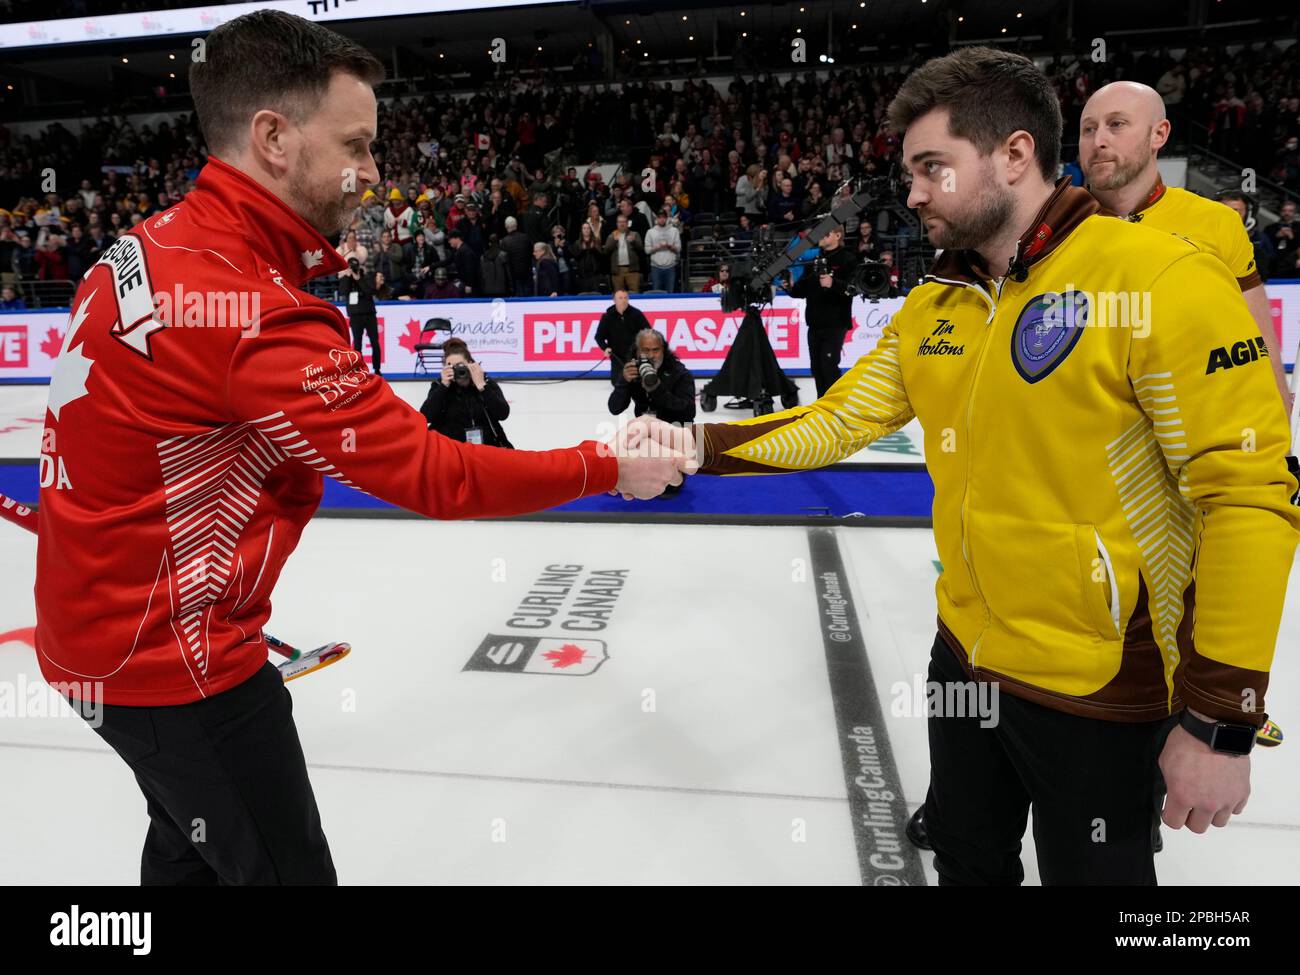 Team Canada skip Brad Gushue, left, shakes hands with Team Manitoba skip Matt Dunstone after winning the finals of the Tim Hortons Brier curling event in London, Ontario, Sunday, March 12, 2023